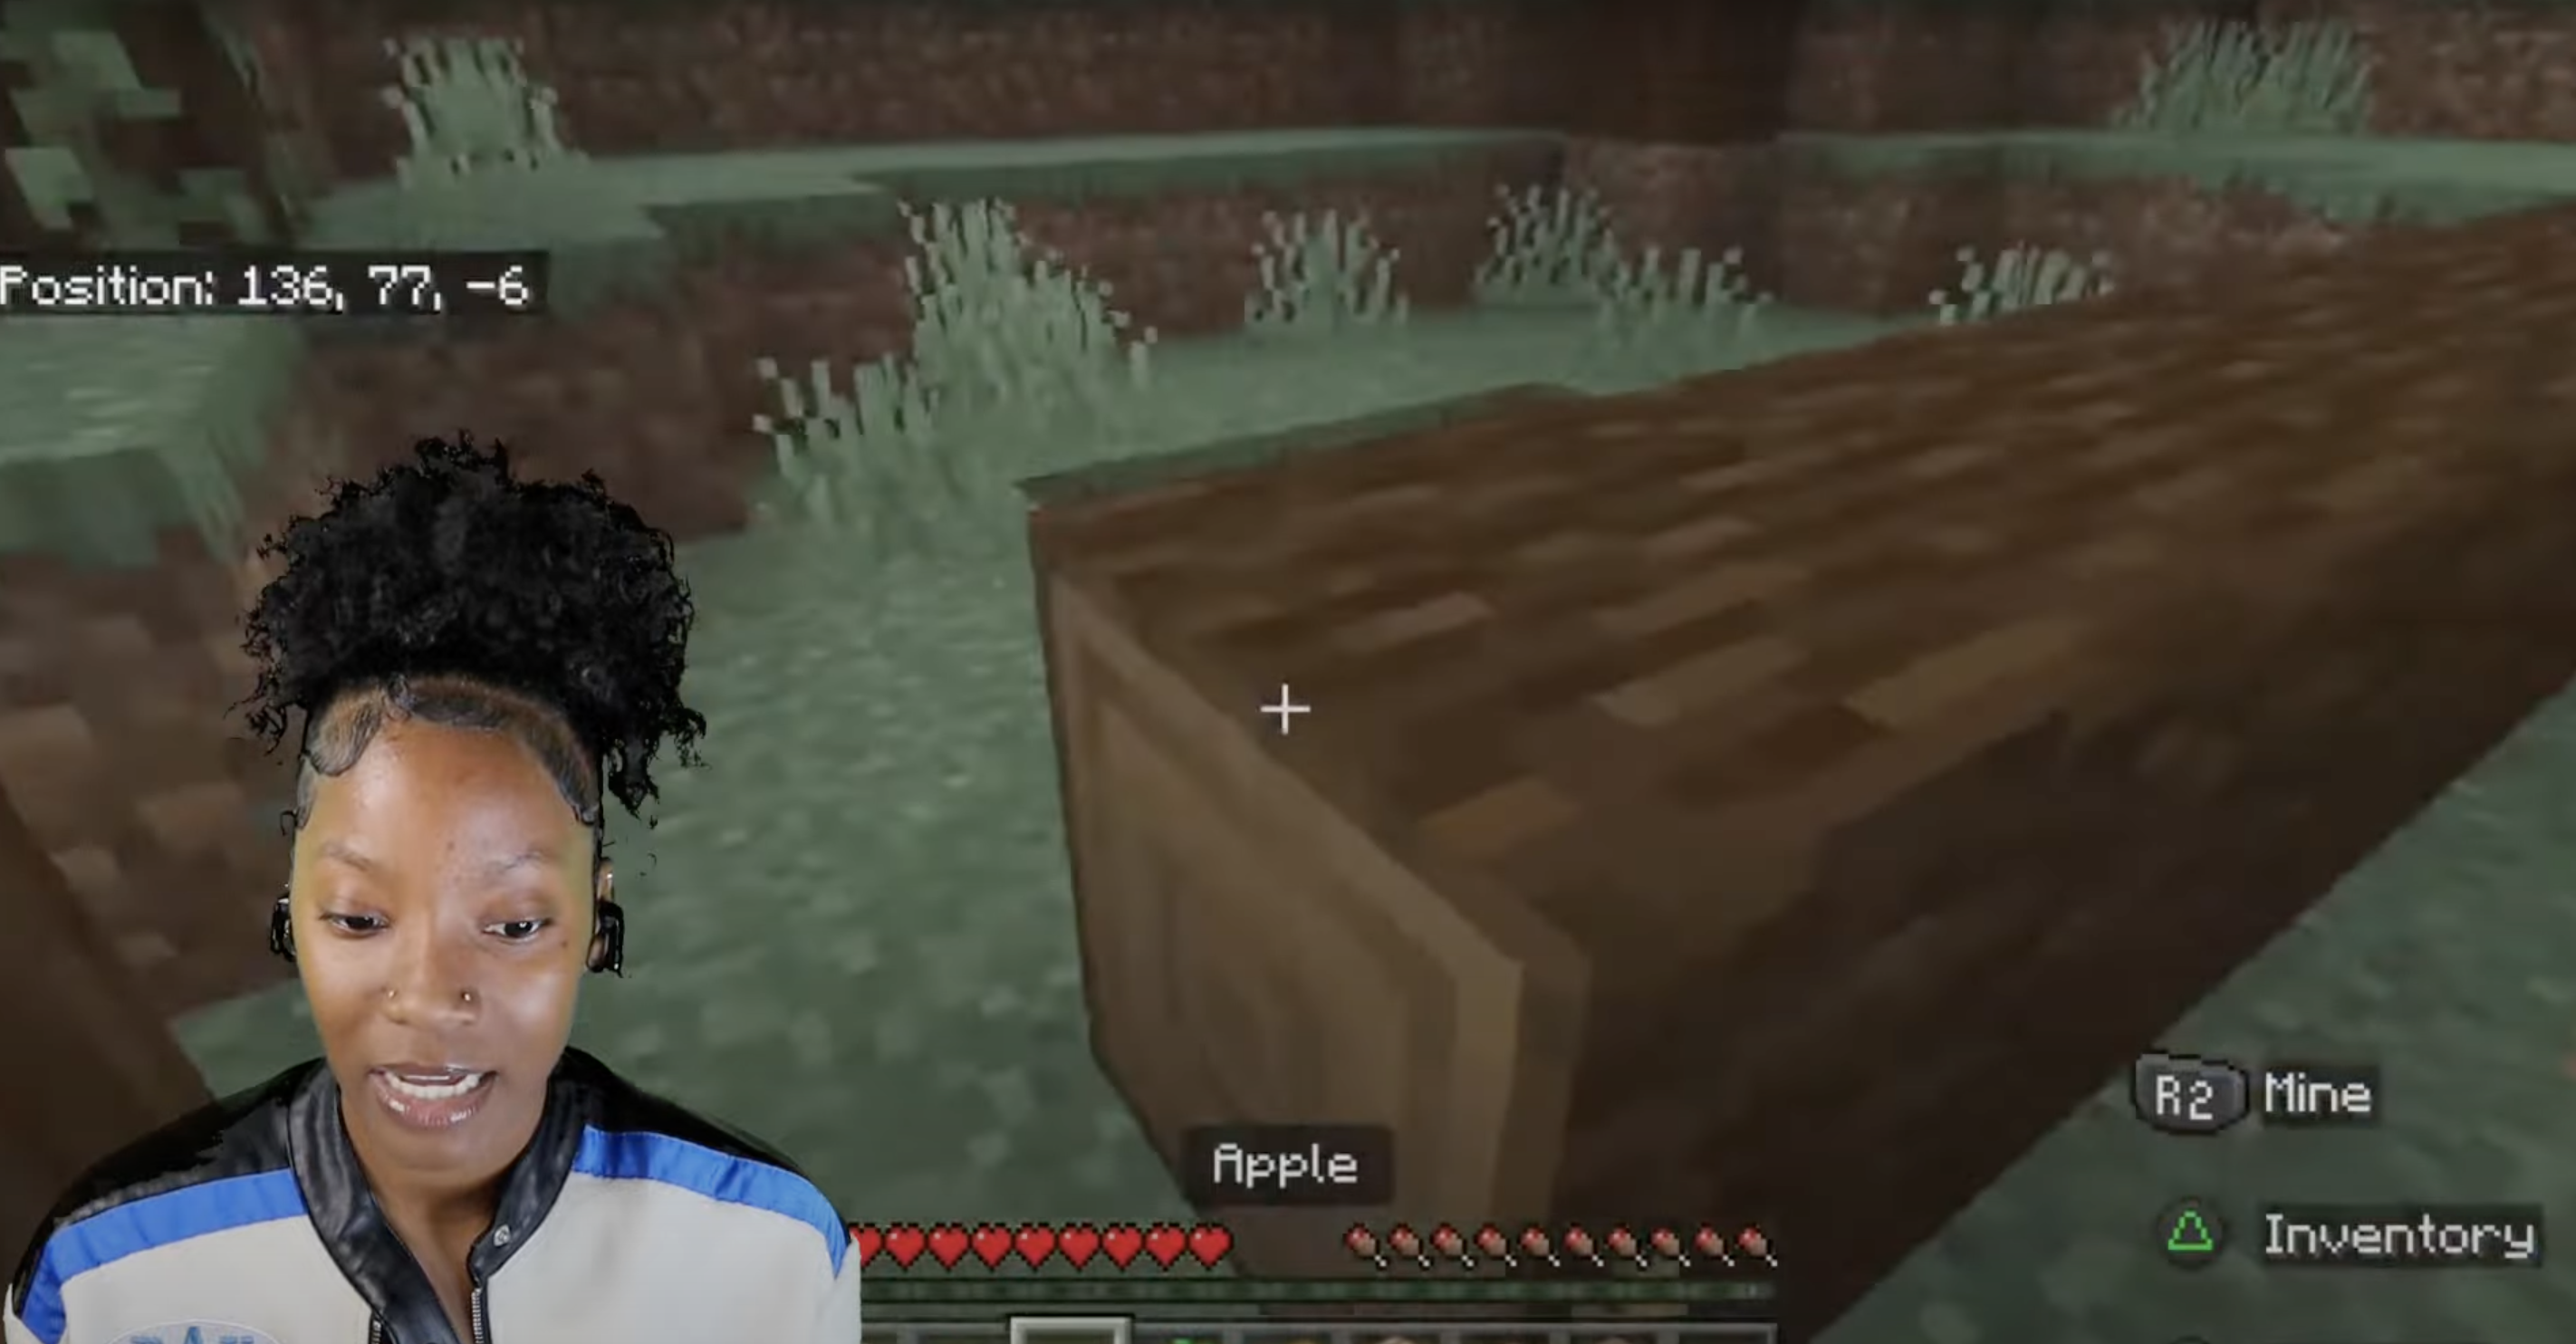 Person playing Minecraft, showing inventory with an apple, overlaying gameplay scene